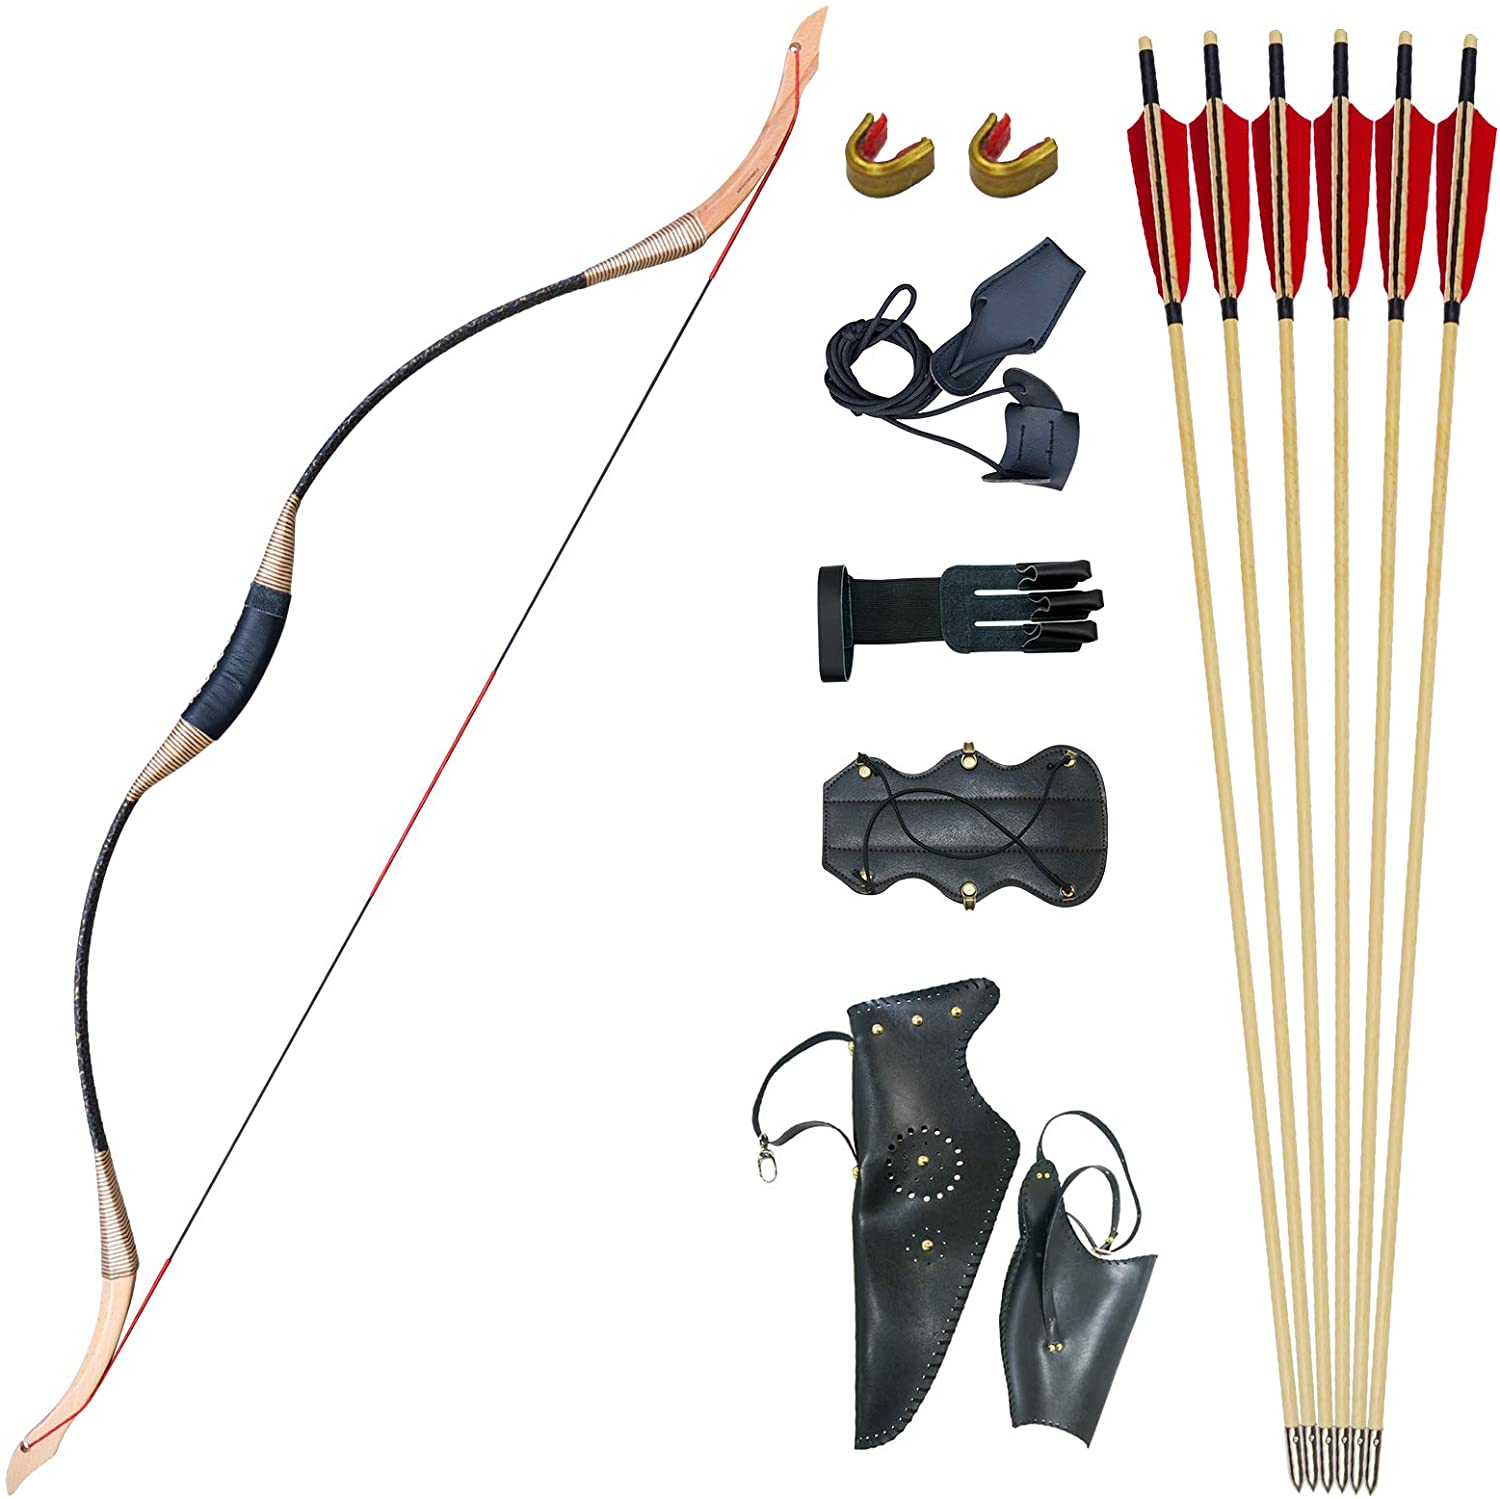 40LB Handmade Traditional Recurve Bow Horse Riding Archery Practice Longbow 